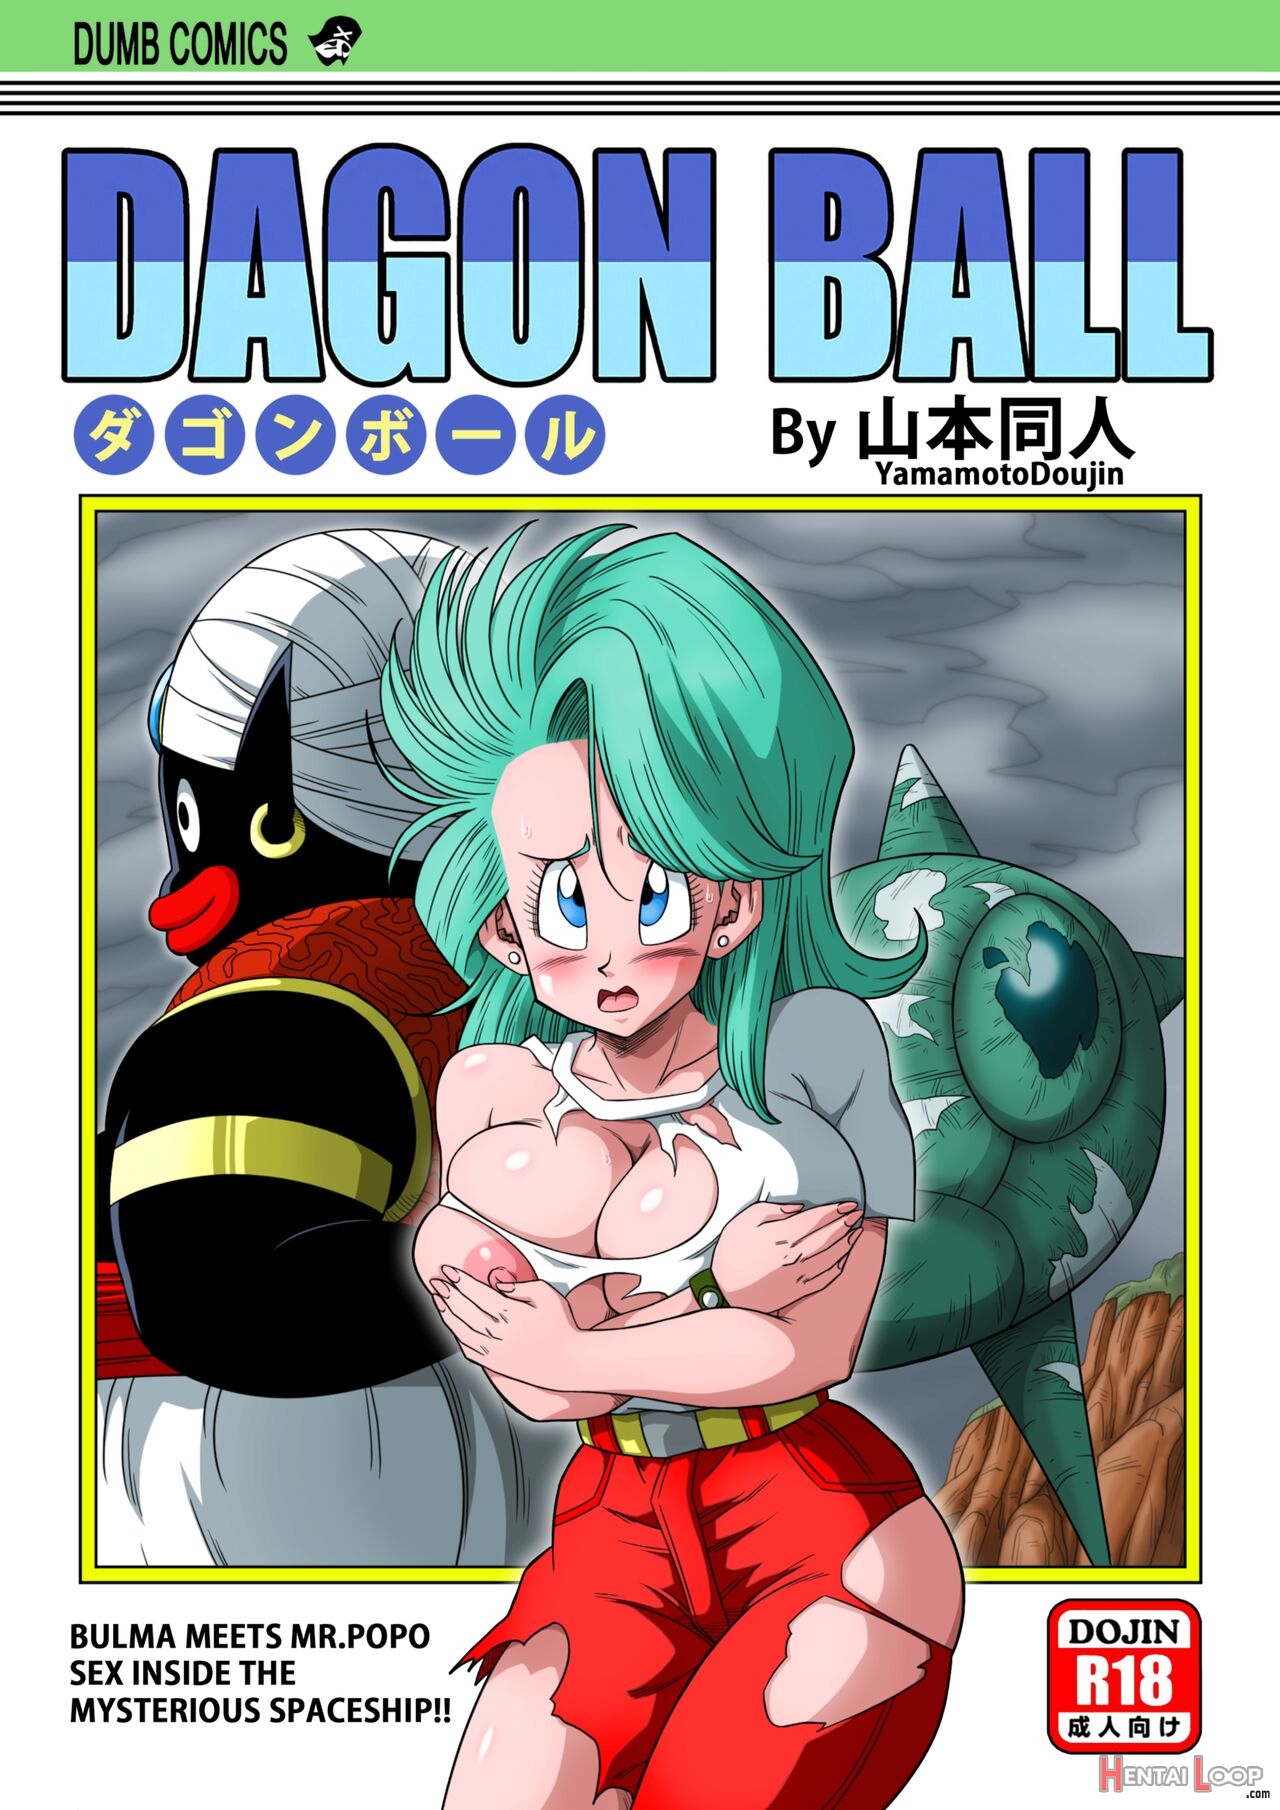 Bulma Meets Mr.popo - Sex Inside The Mysterious Spaceship! page 1